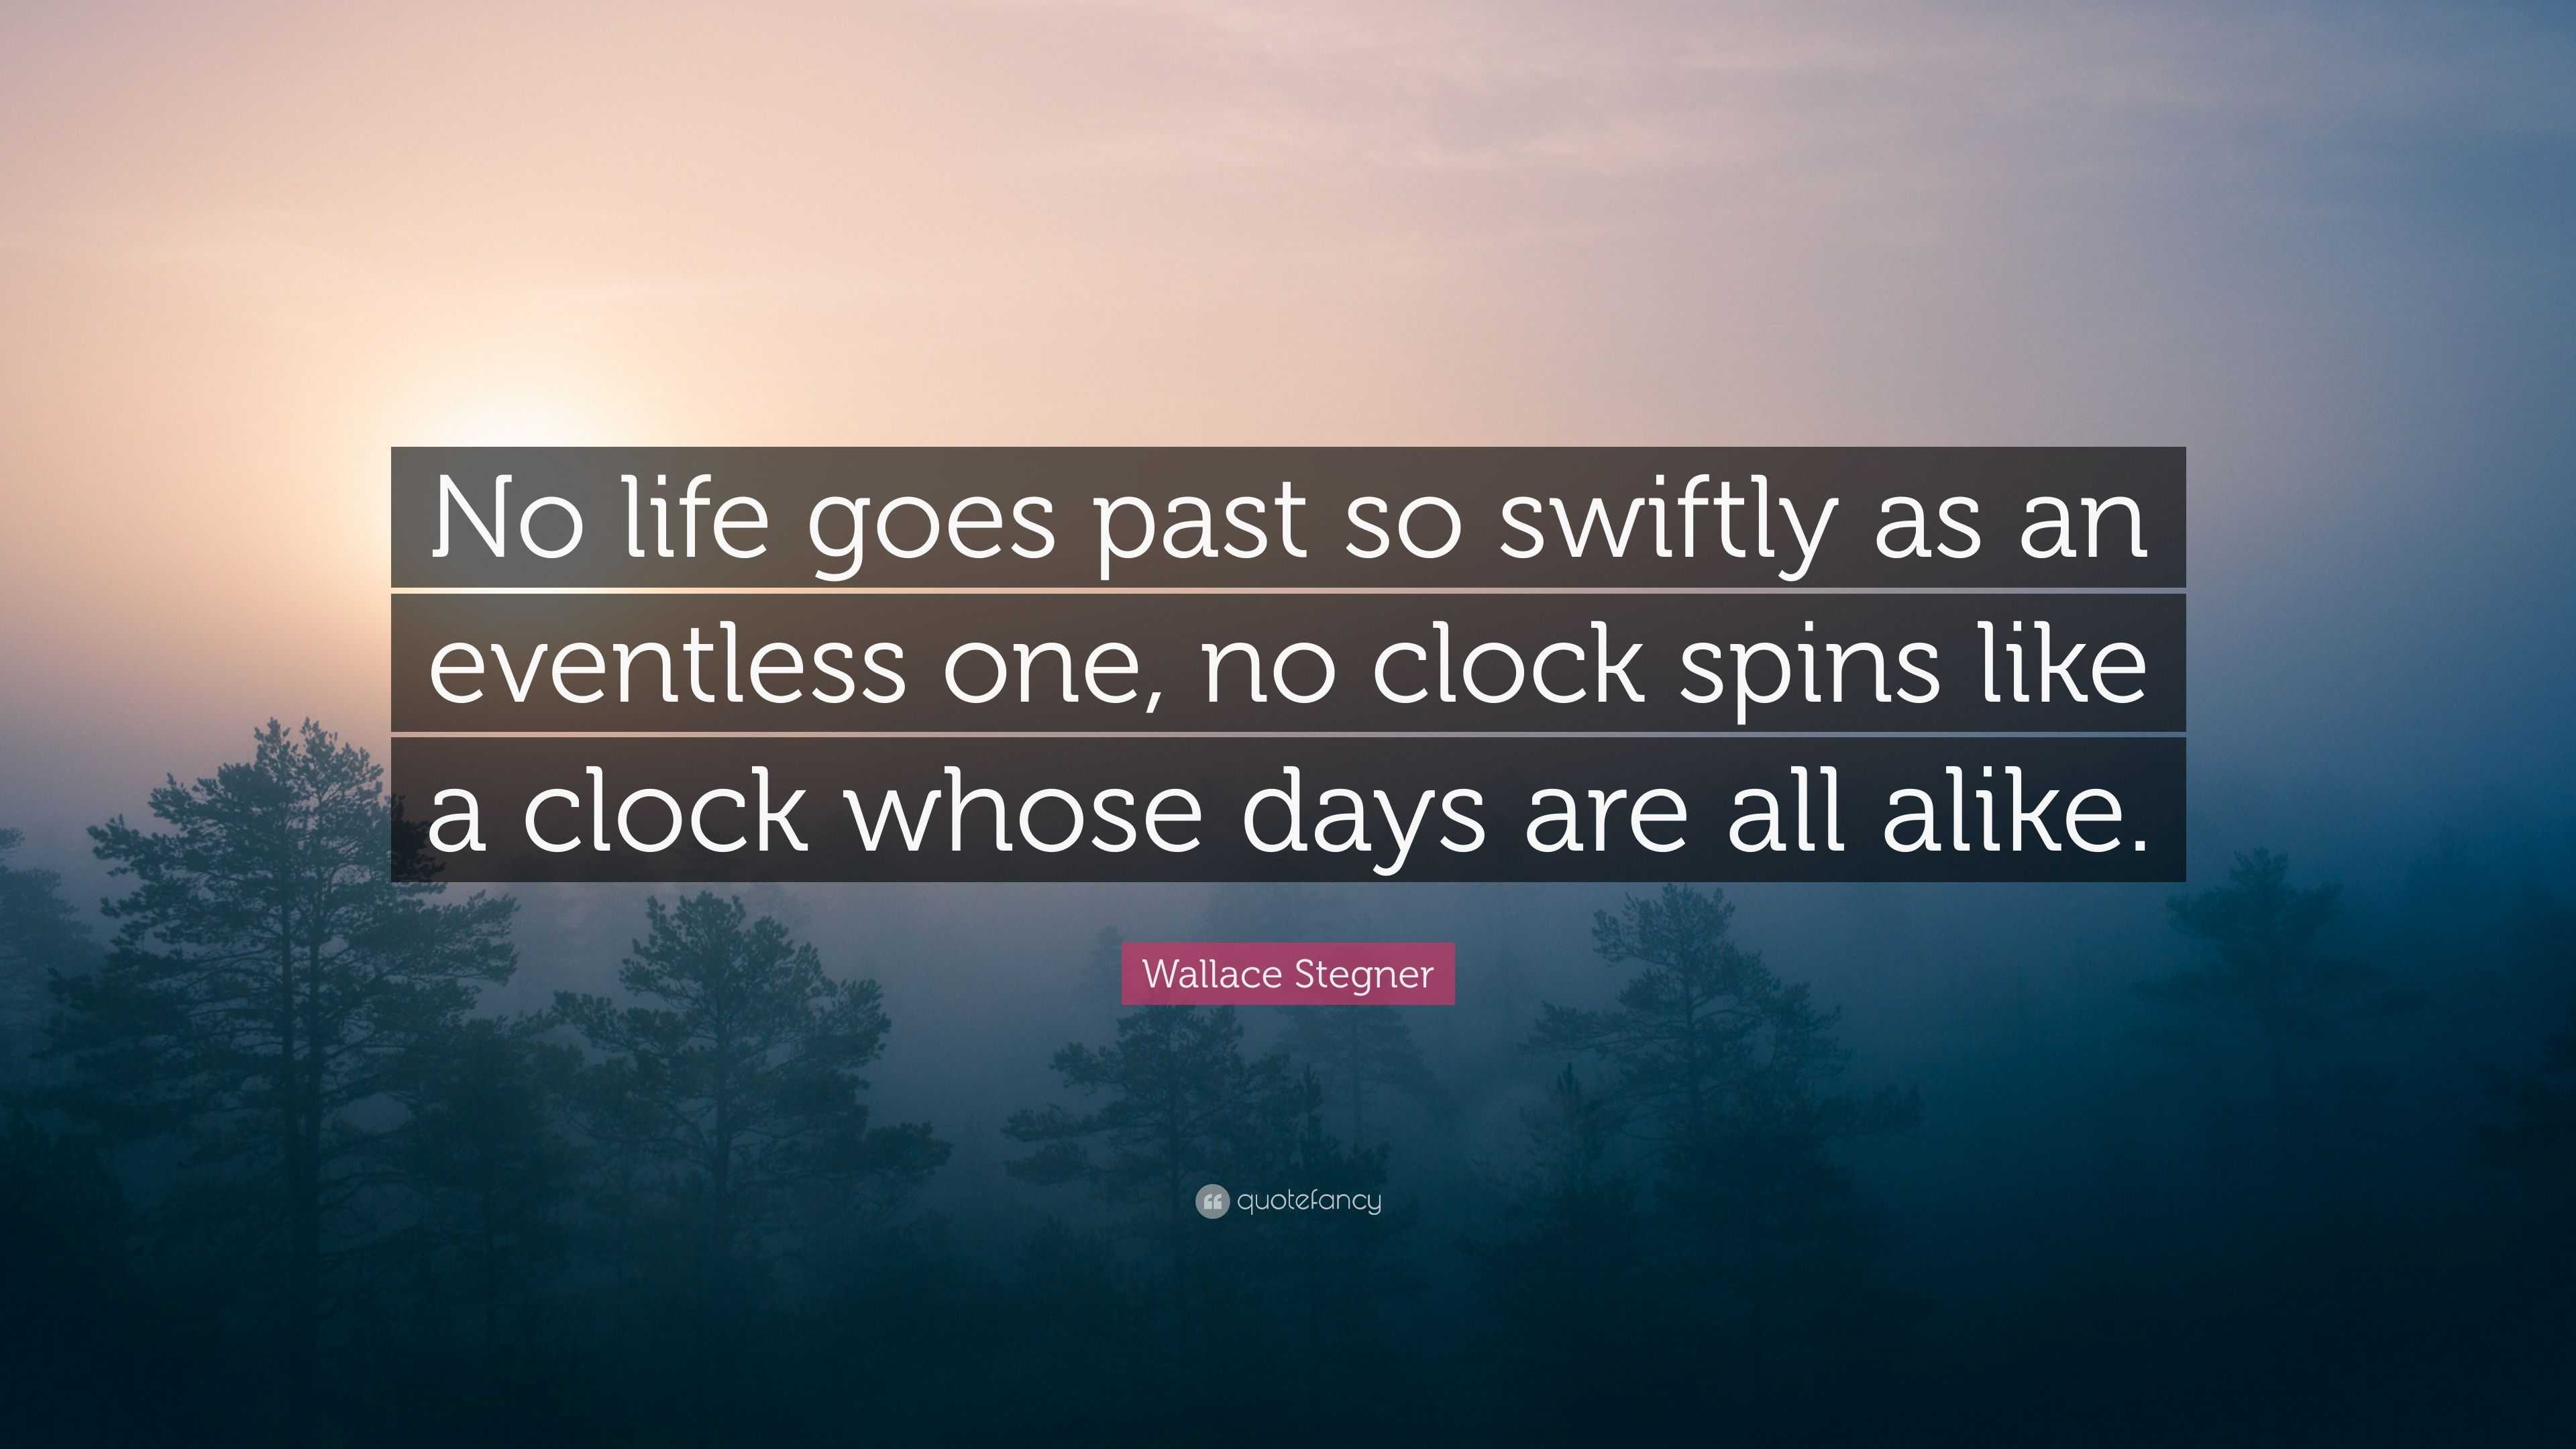 Wallace Stegner Quote “No life goes past so swiftly as an eventless one